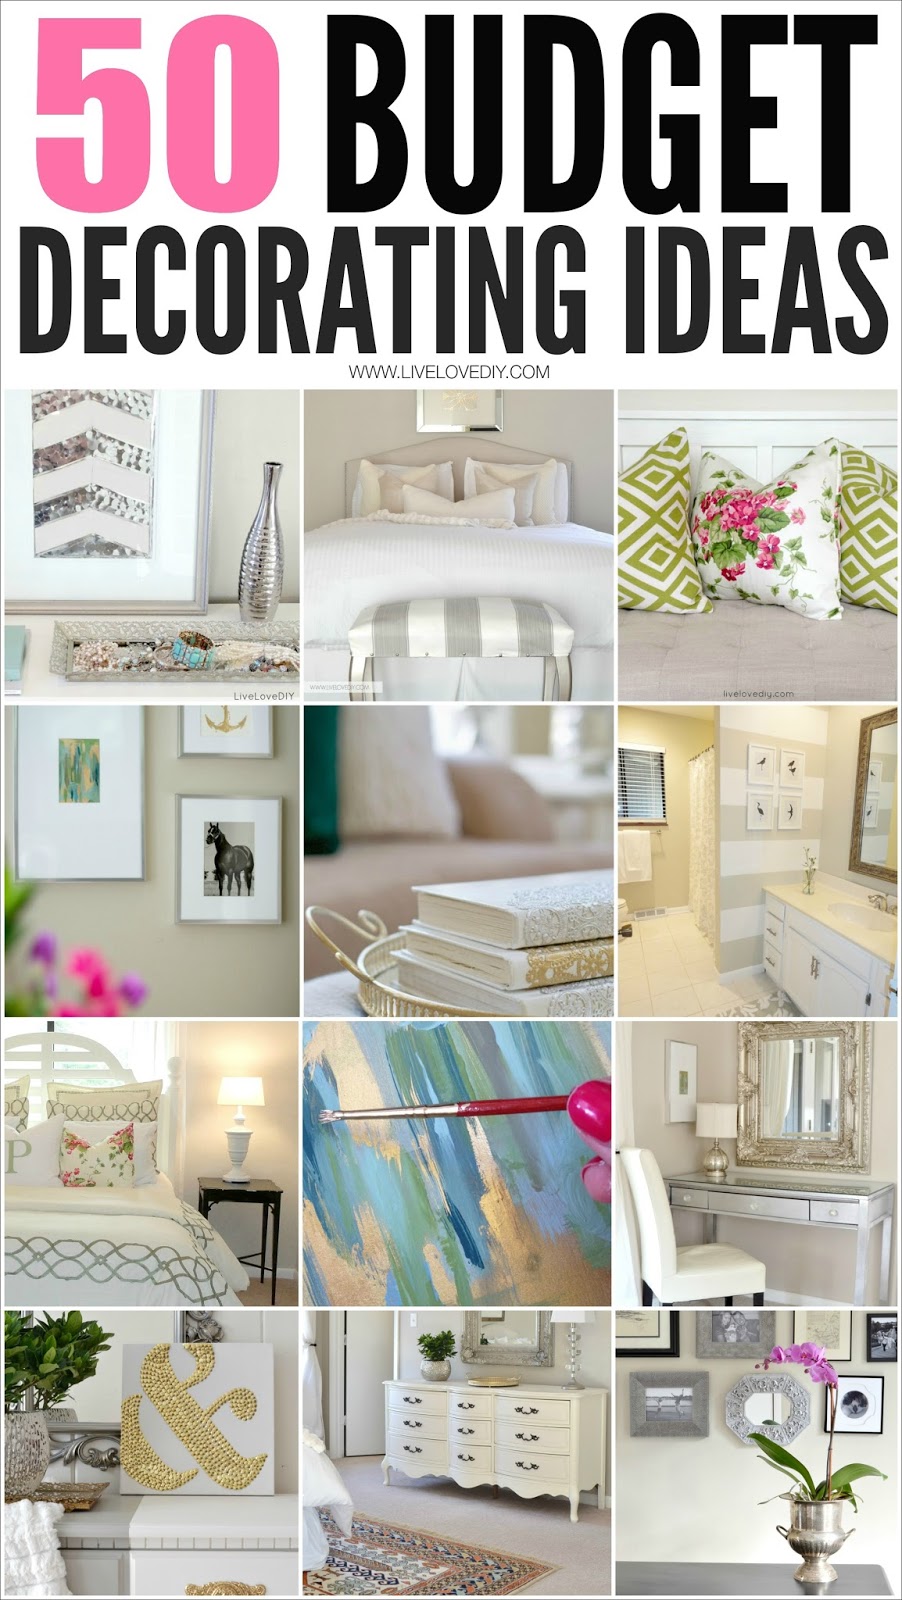 50 Amazing Budget Decorating Tips Everyone Should Know! I 